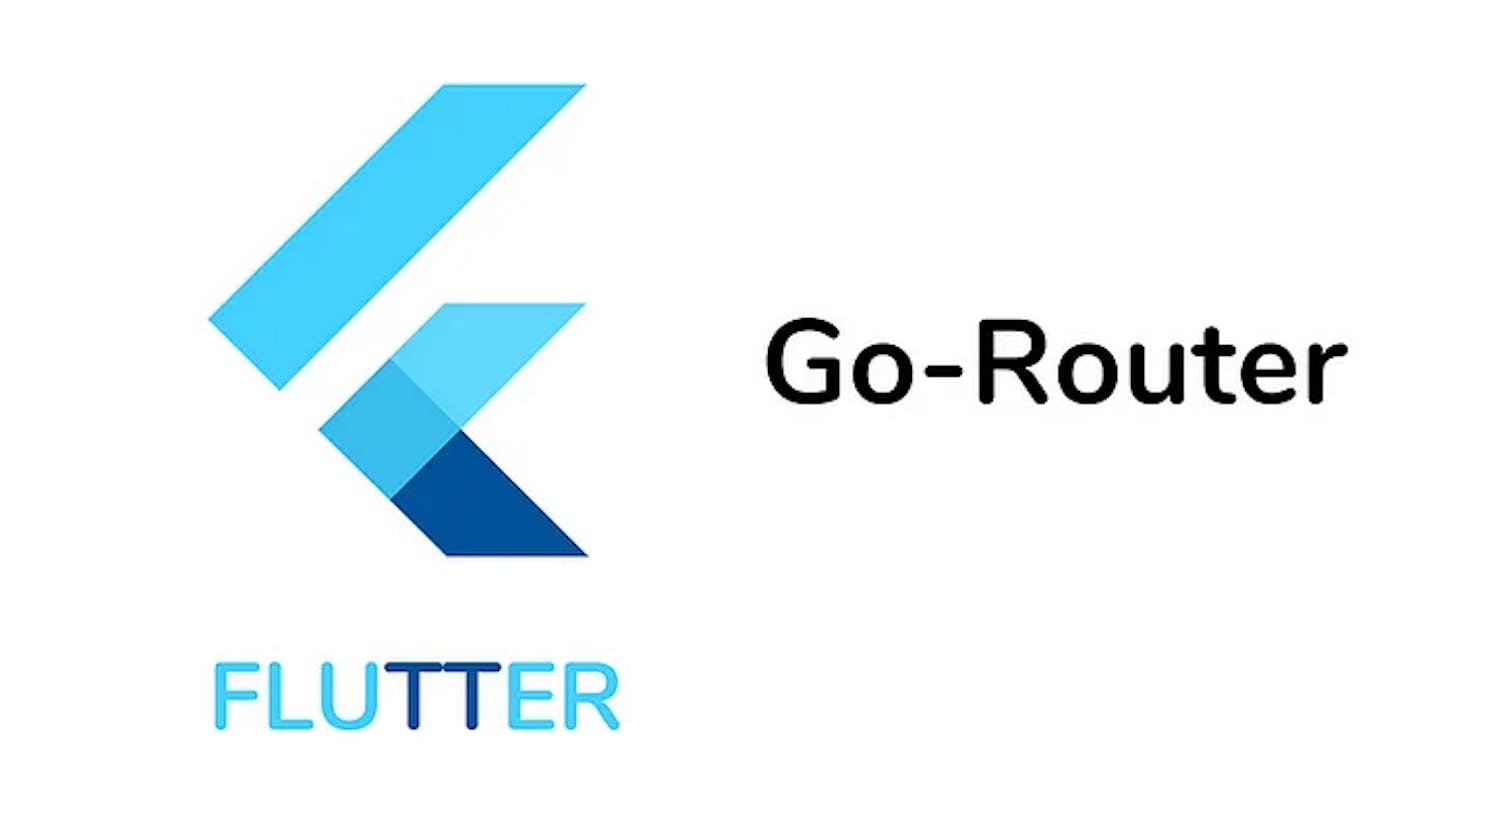 The Ultimate Guide to GoRouter: Navigation in Flutter Apps Part -2 (Nested Routers, Redirect, Guard, Error Handling)